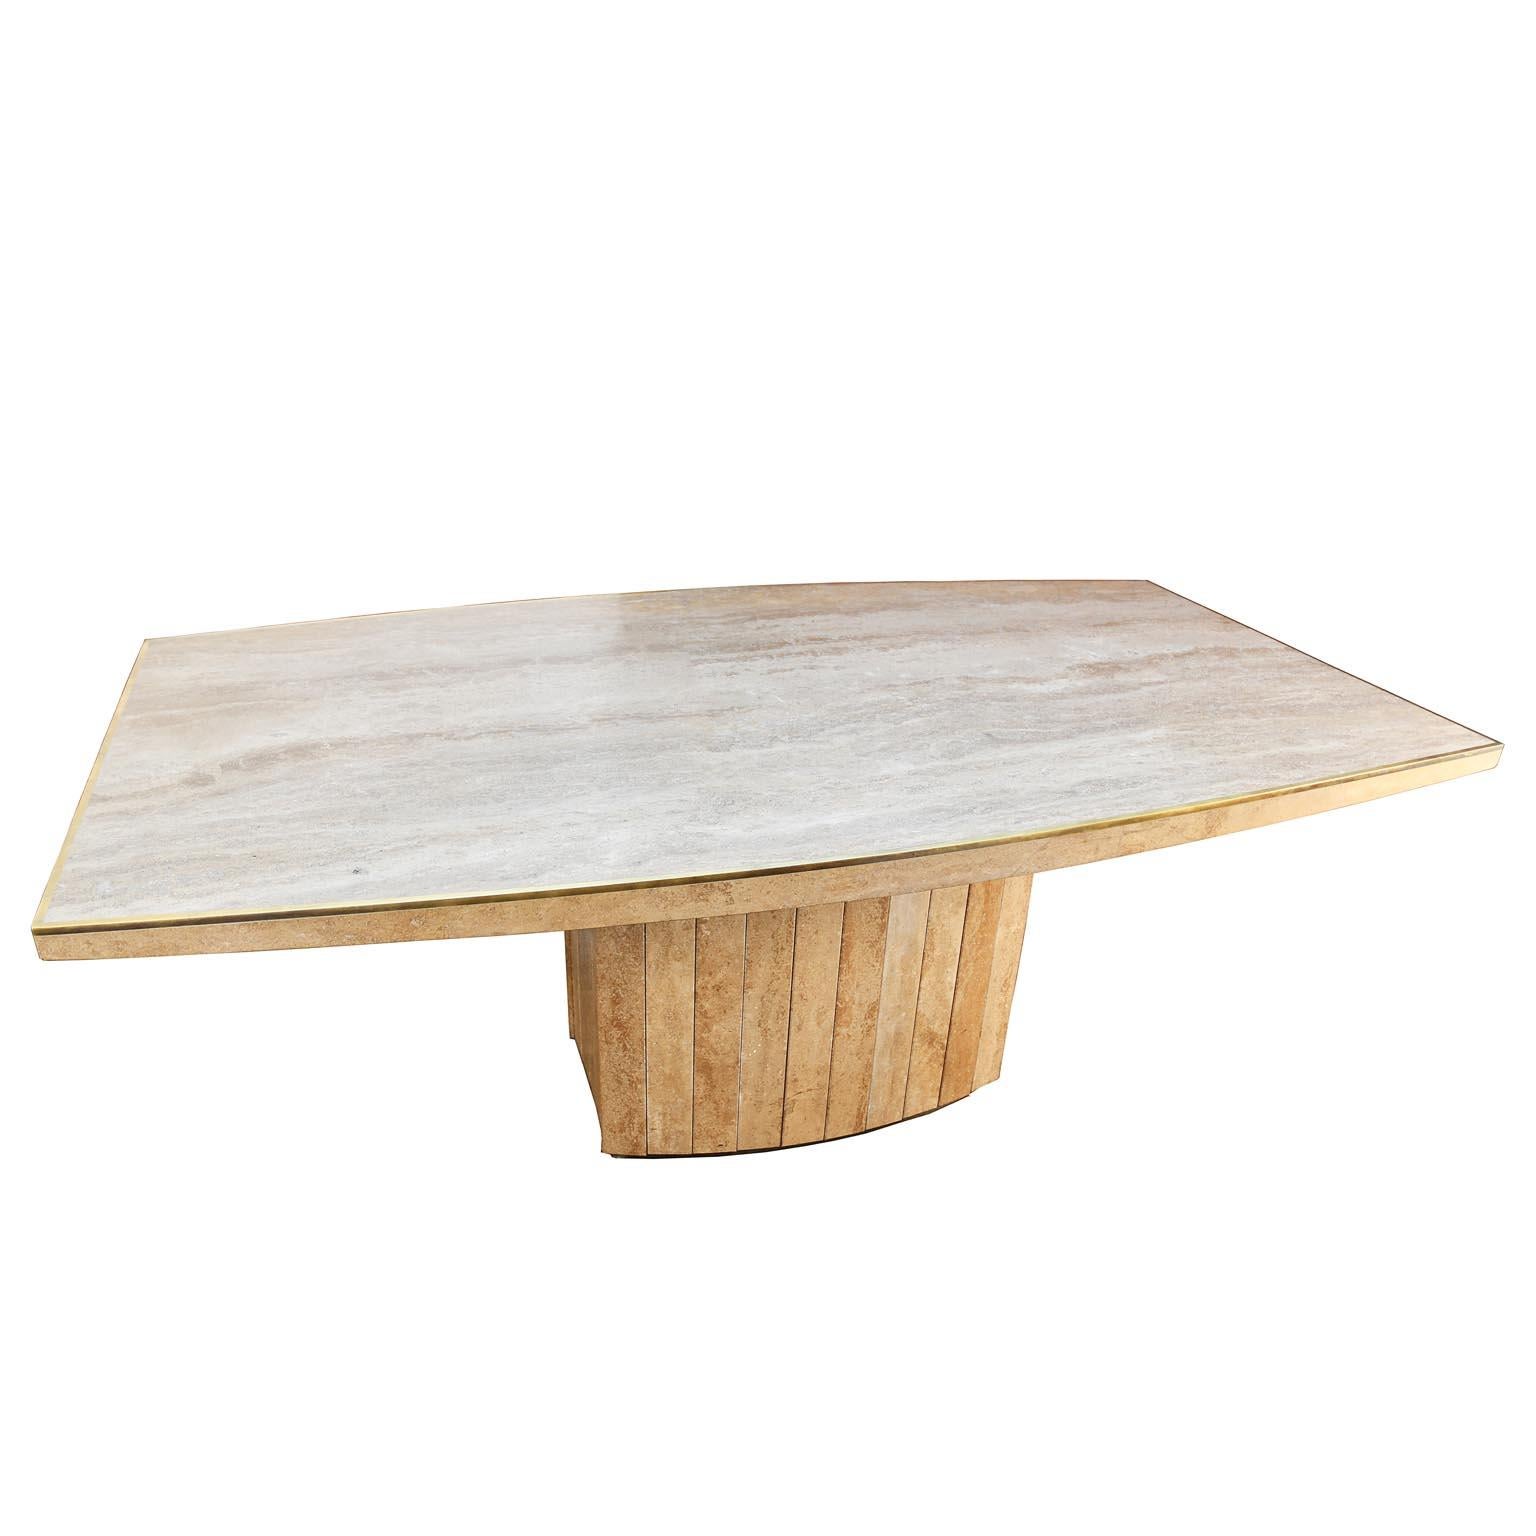 Dining table design Willy Rizzo, executed by Jean Charles around 1970s. The table is made of tarvertine, the top is in one piece, finished with an elegant brass edge.
The base is also made of tarvertine slabs, which shape has a fine bend. At the